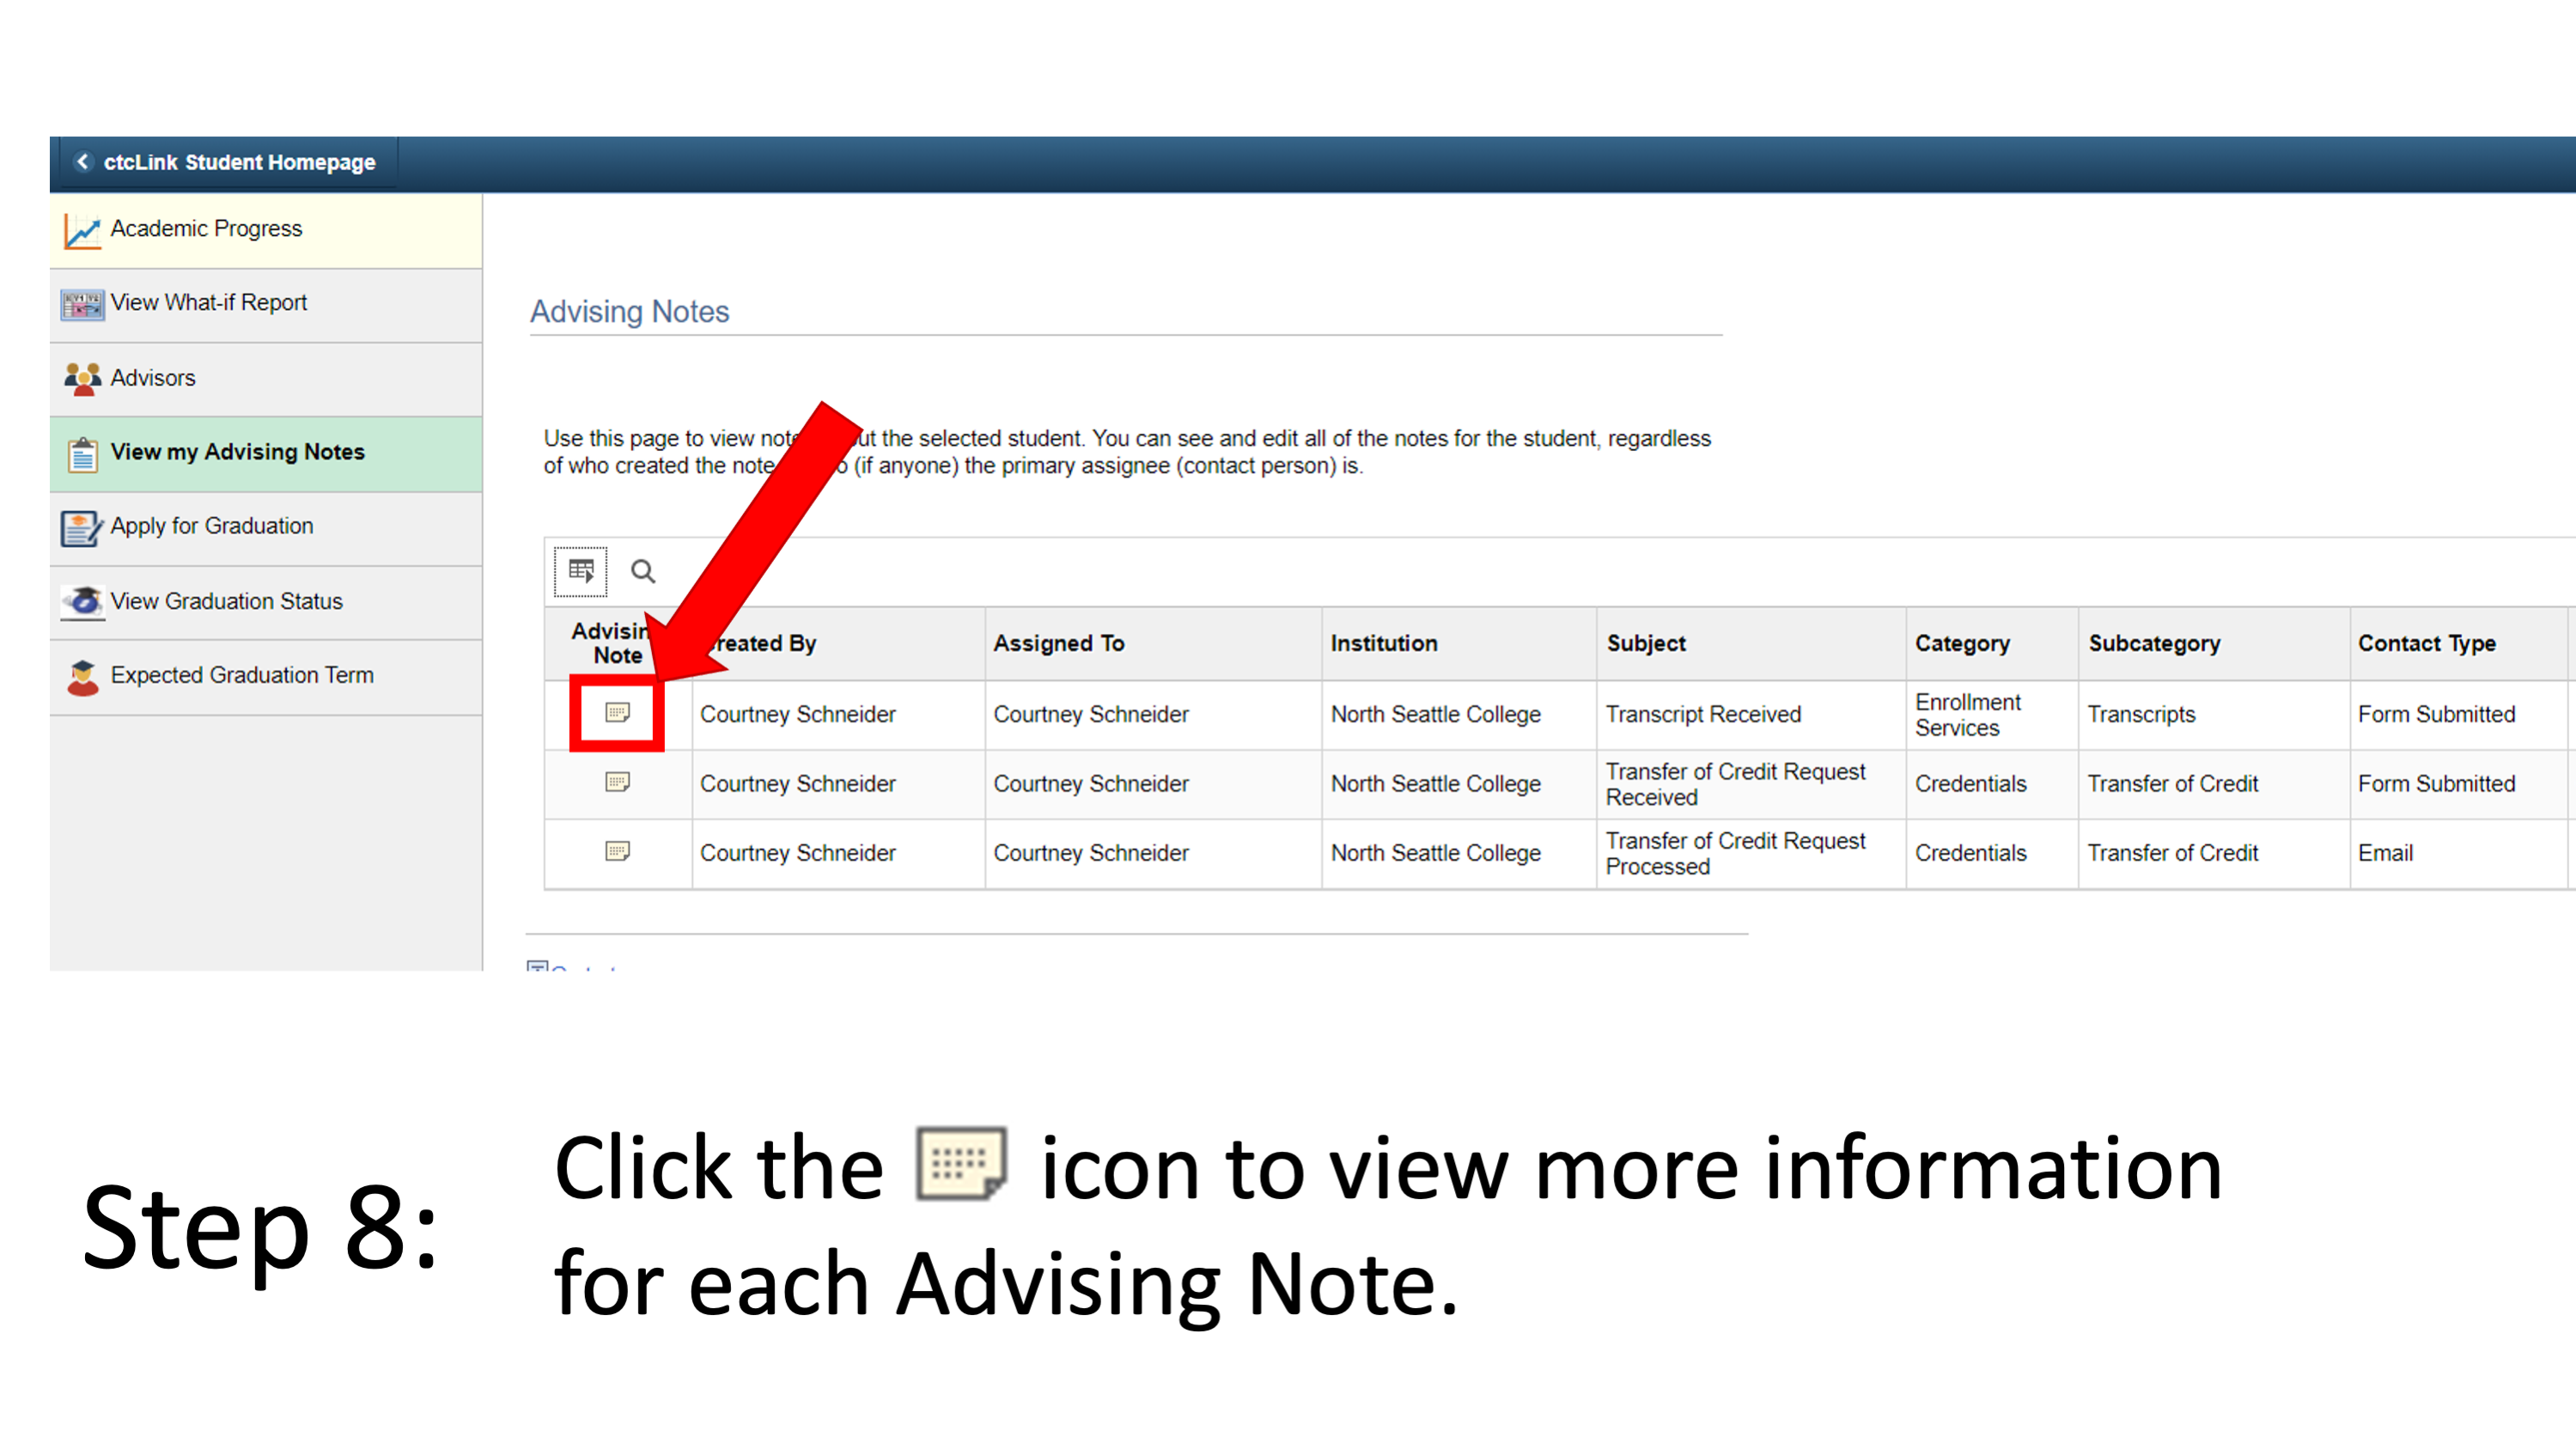 Step 8: Click the keyboard icon to view more information for each Advising Note.